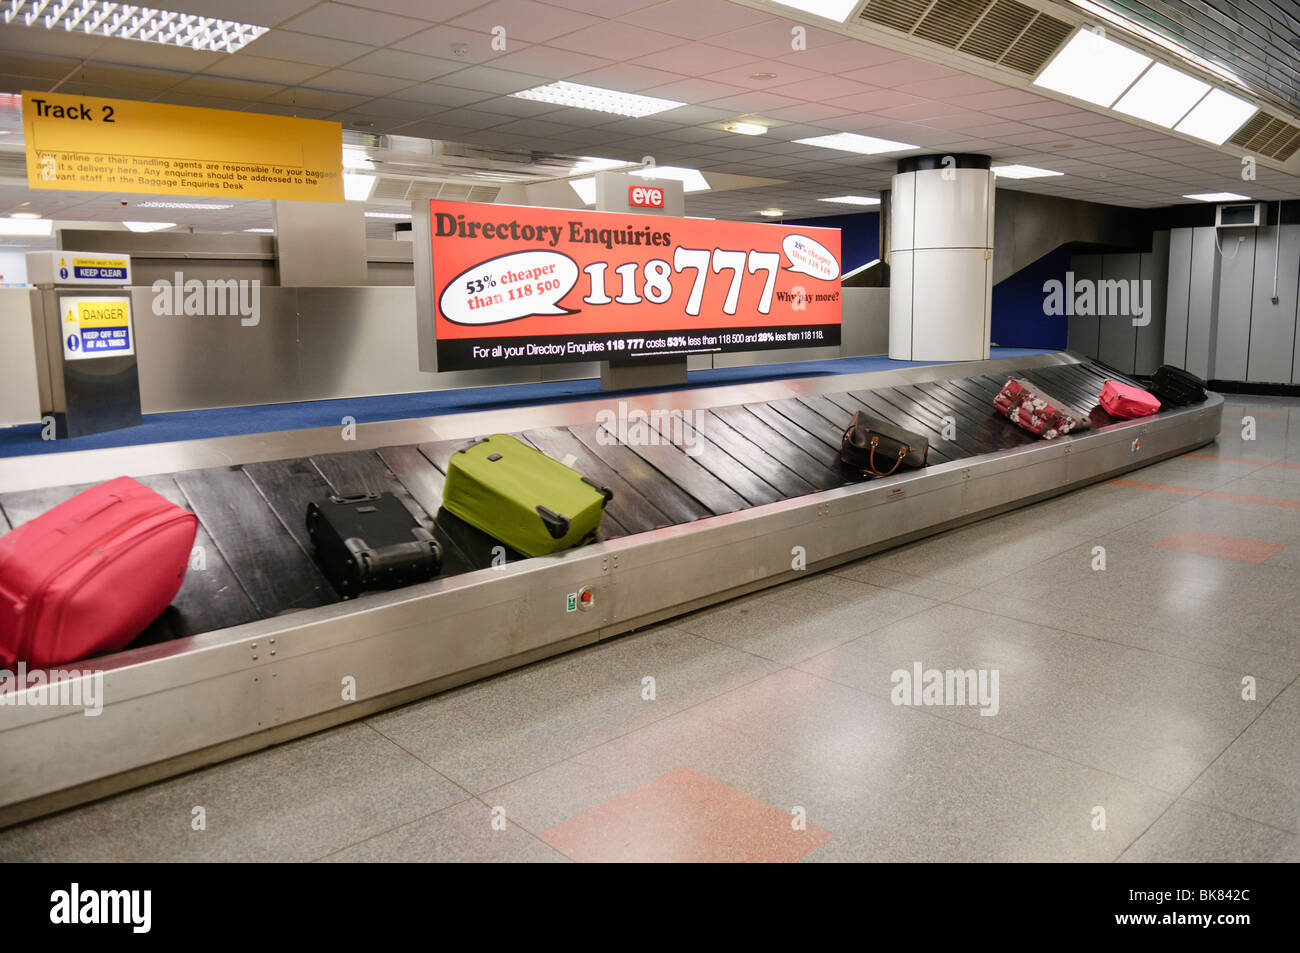 Baggage/Luggage on a luggage carousel at an airport Stock Photo - Alamy